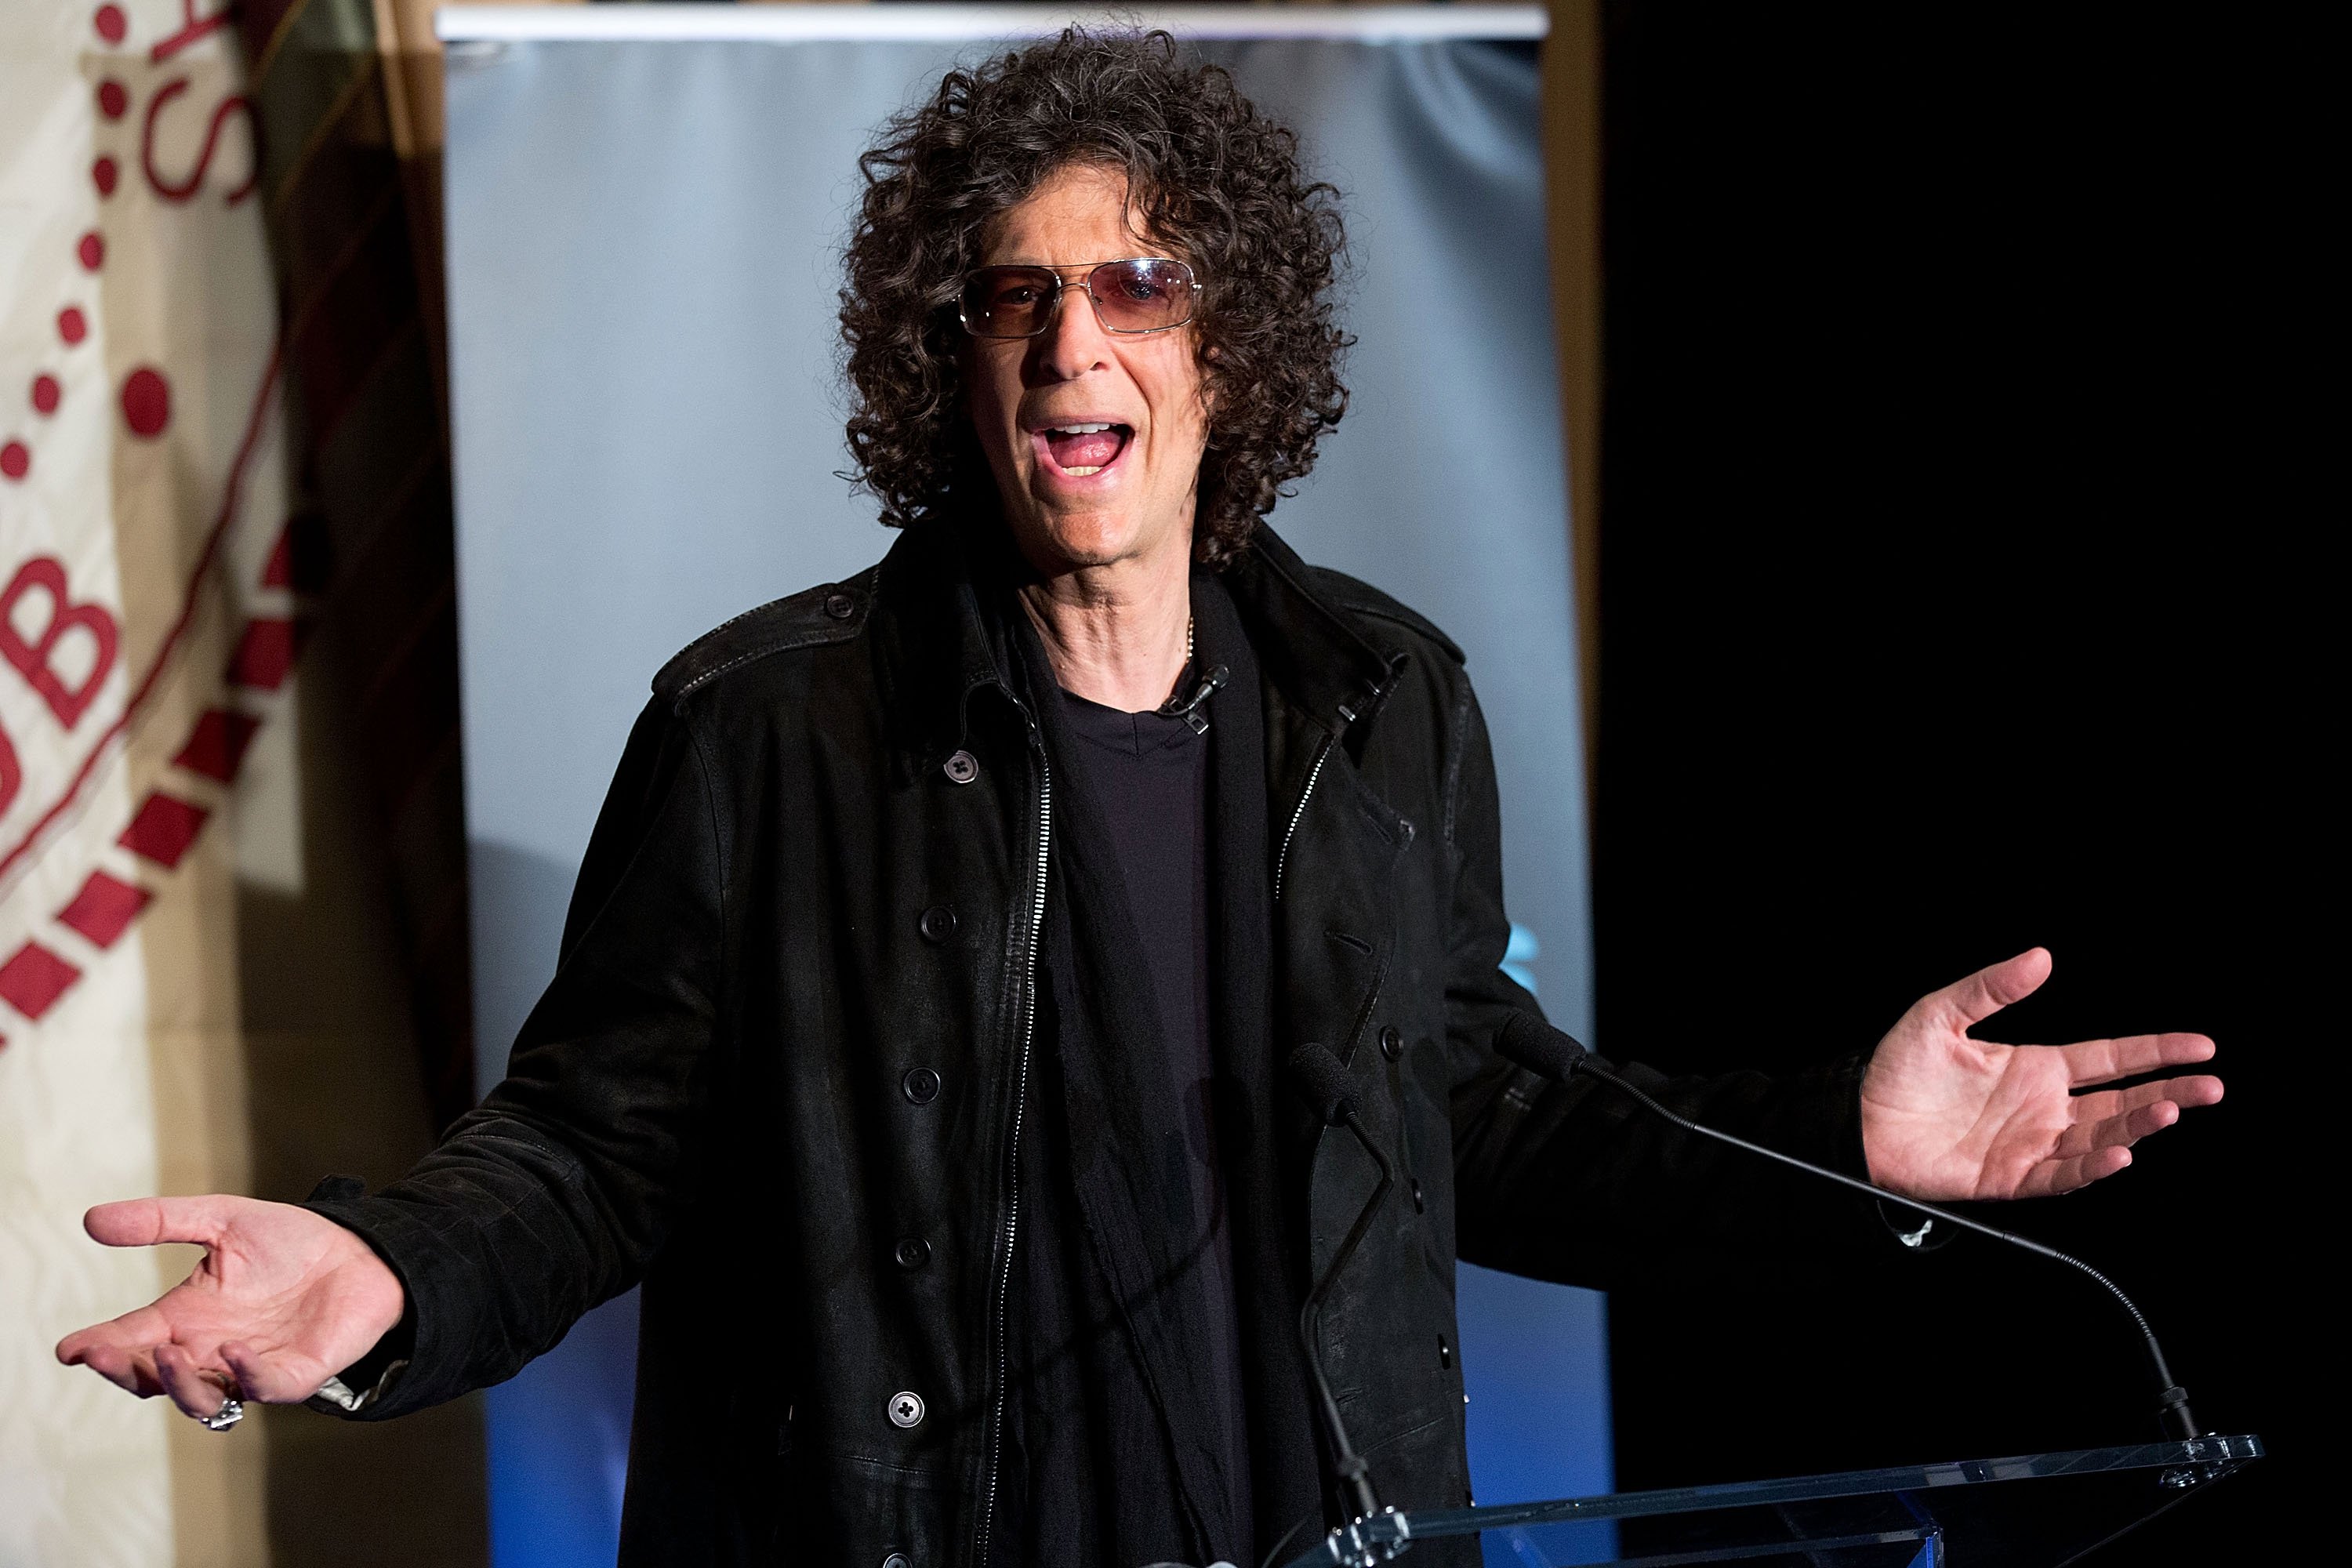 Howard Stern at New York Friars Club on May 10, 2012 | Photo: Getty Images